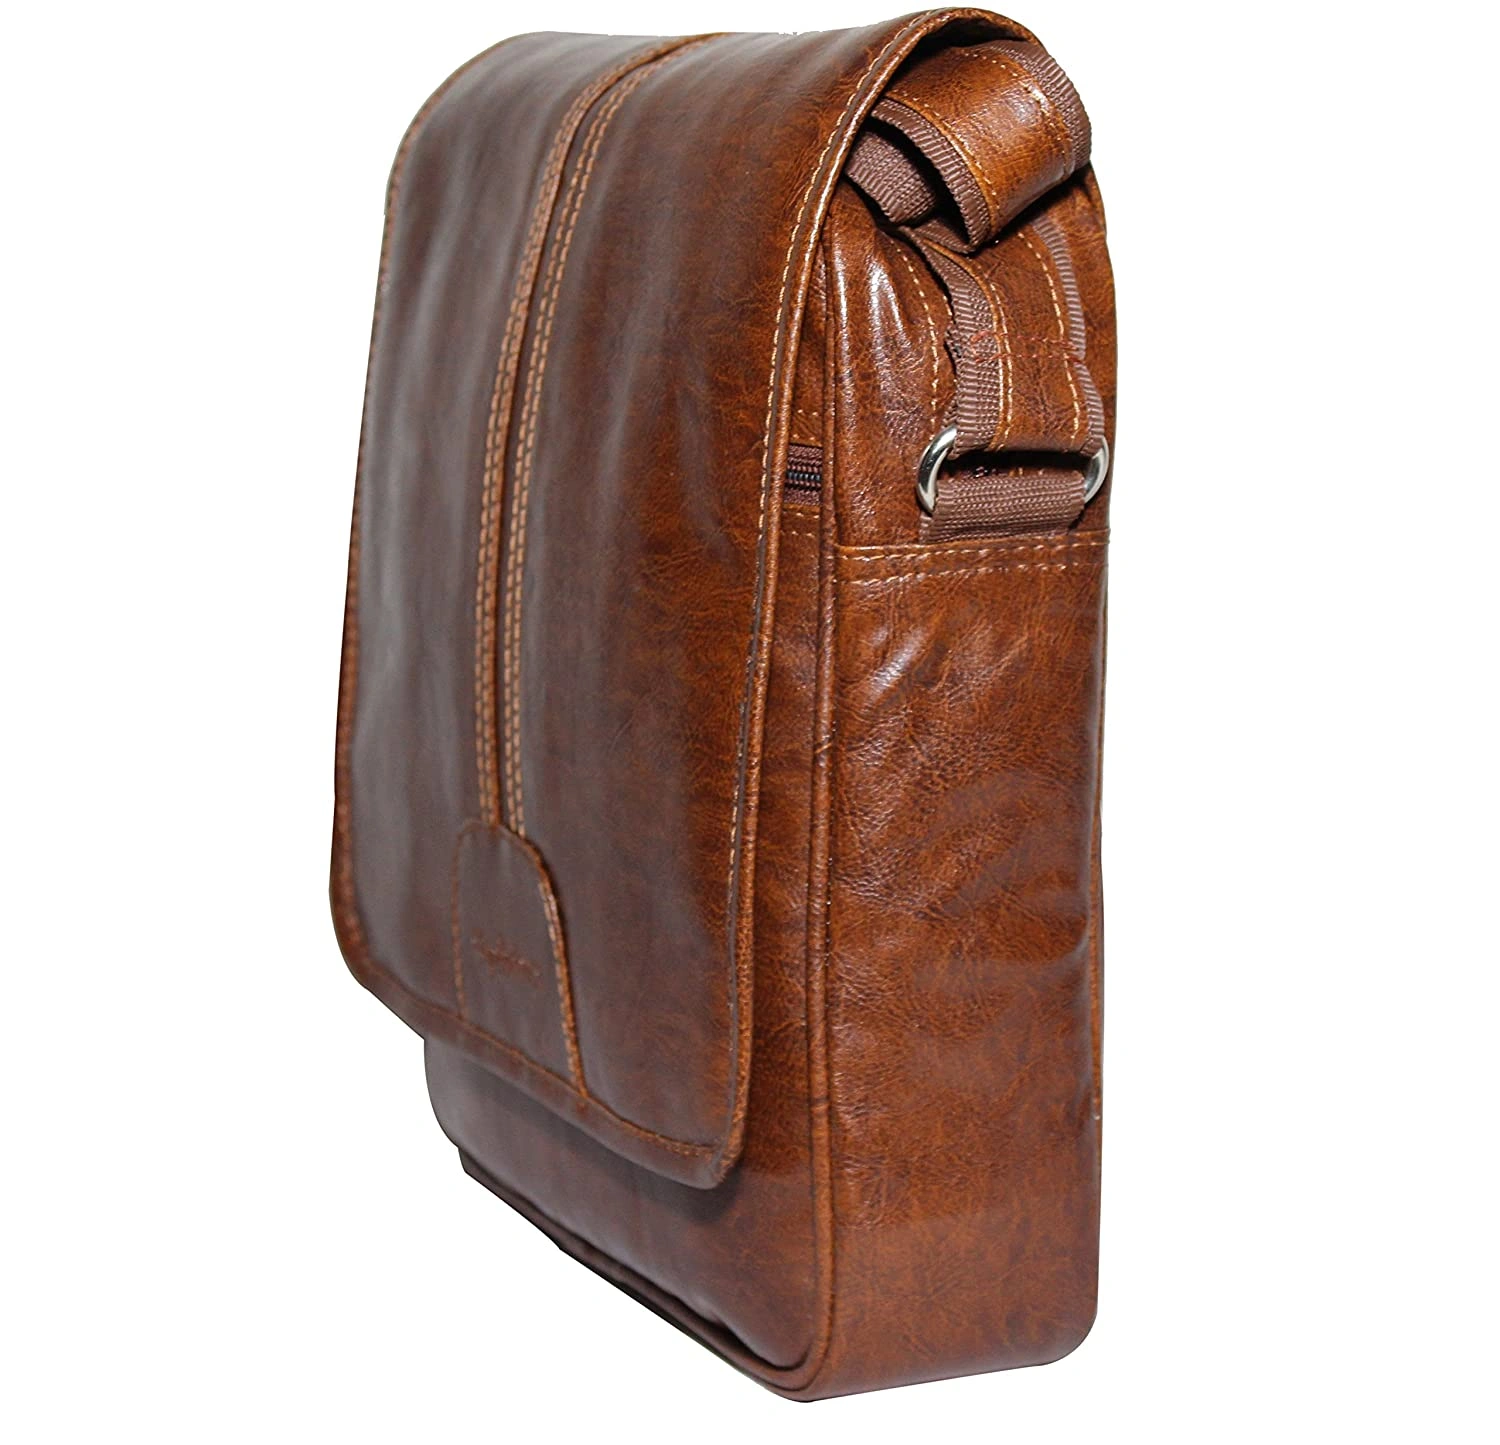 Sphinx Artificial Leather Cross-Body Large Sling Bag for Men/Boys - (L x B x H: 30 x 25 x 7 cm) (Tan-1